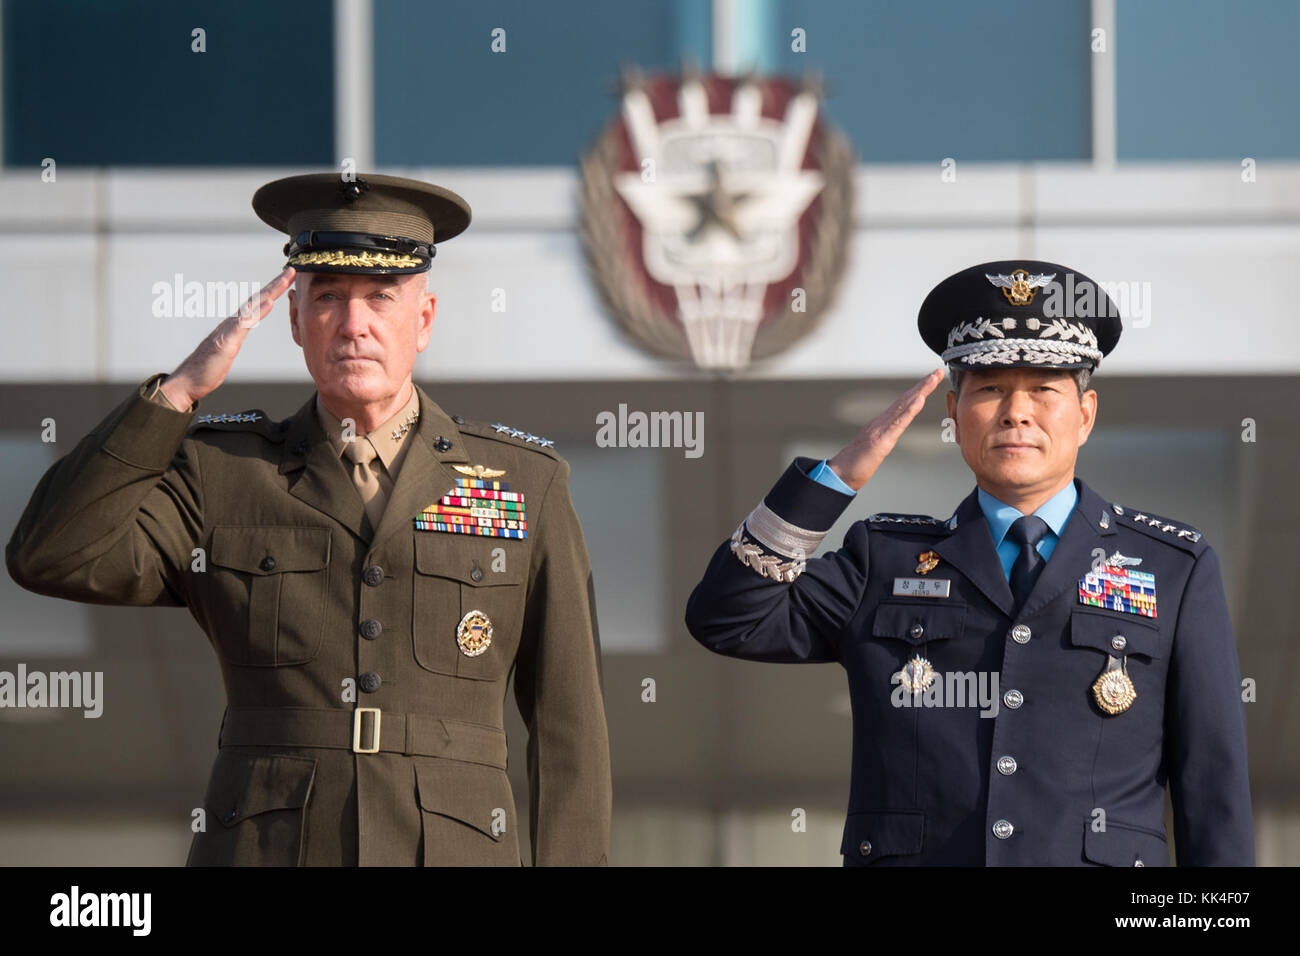 Marine Corps Gen. Joseph F. Dunford Jr., chairman of the Joint Chiefs of Staff, participates in an honor guard welcome ceremony with Republic of Korea Air Force Gen. Jeong Kyeong-doo, chairman of the ROK Joint Chiefs of Staff, before the start of the 42nd Military Committee Meeting at the ROK Joint Chiefs of Staff Headquarters in Seoul, Republic of Korea, Oct. 27, 2017. (DOD photo by U.S. Navy Petty Officer 1st Class Dominique A. Pineiro) Stock Photo